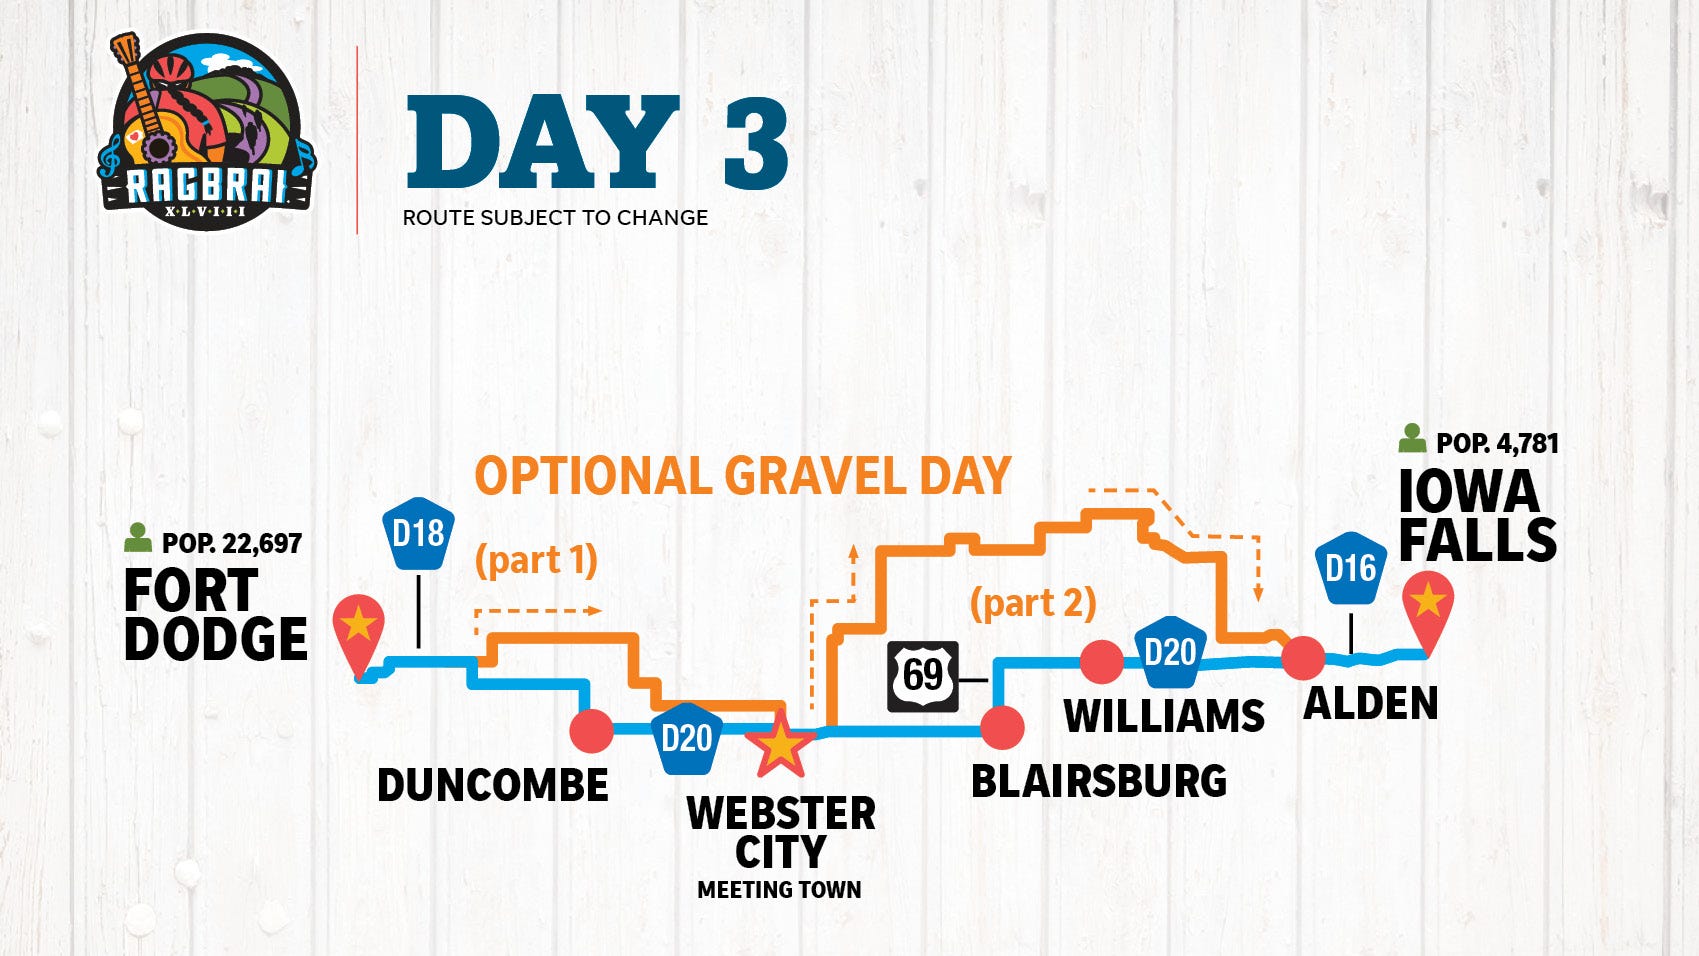 RAGBRAI Map, info about Day 3 of the ride from Fort Dodge to Iowa Falls